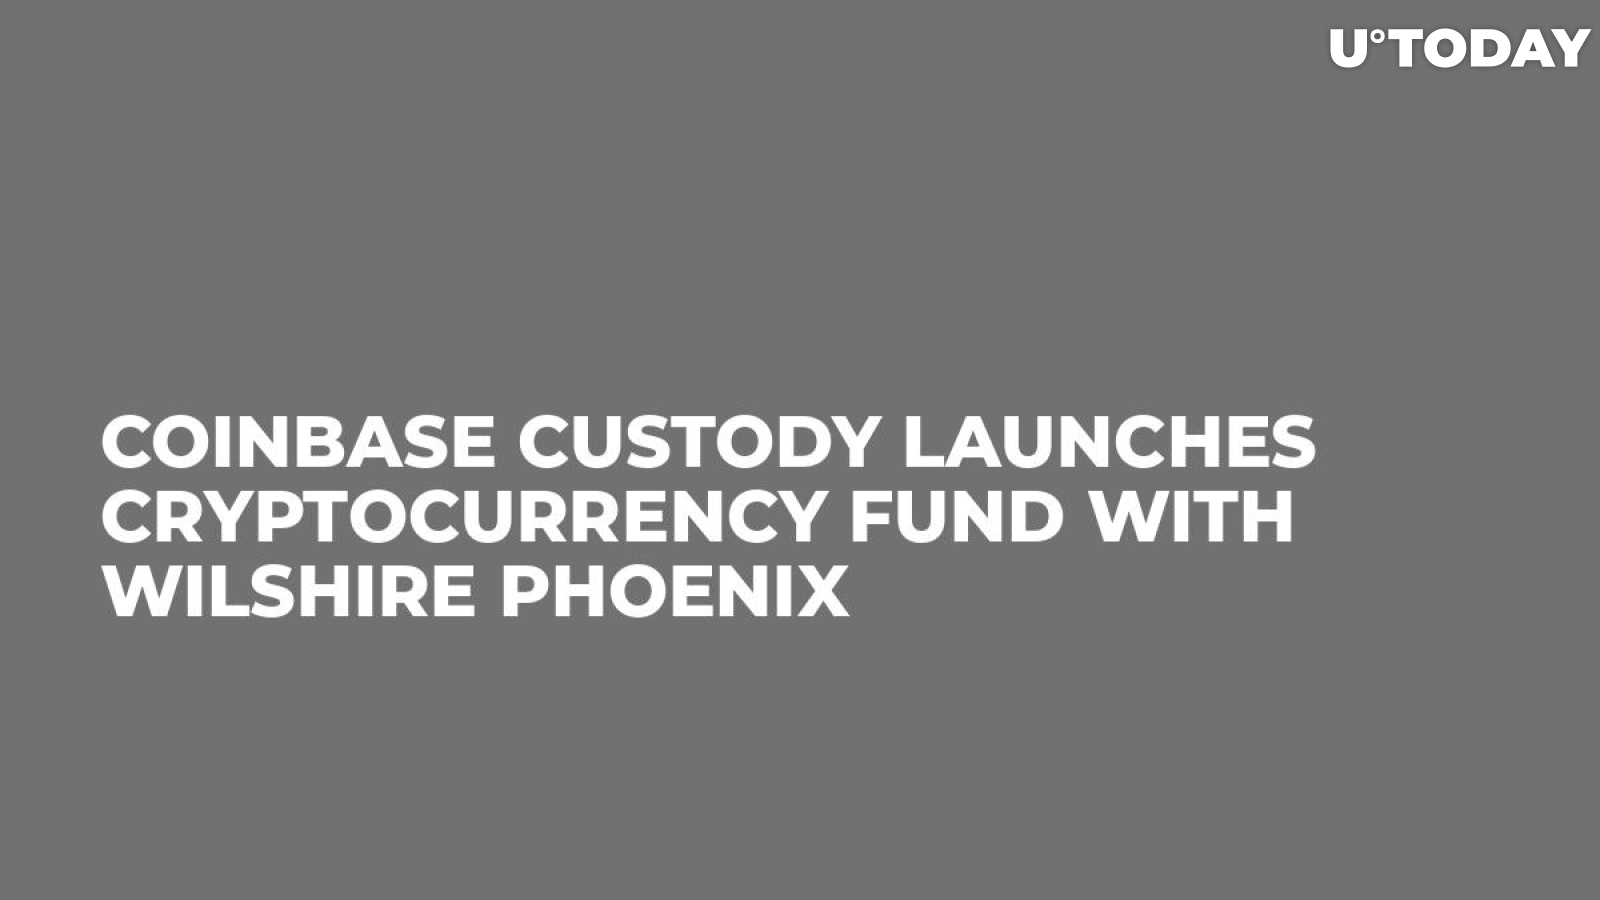 Coinbase Custody Launches Cryptocurrency Fund With Wilshire Phoenix